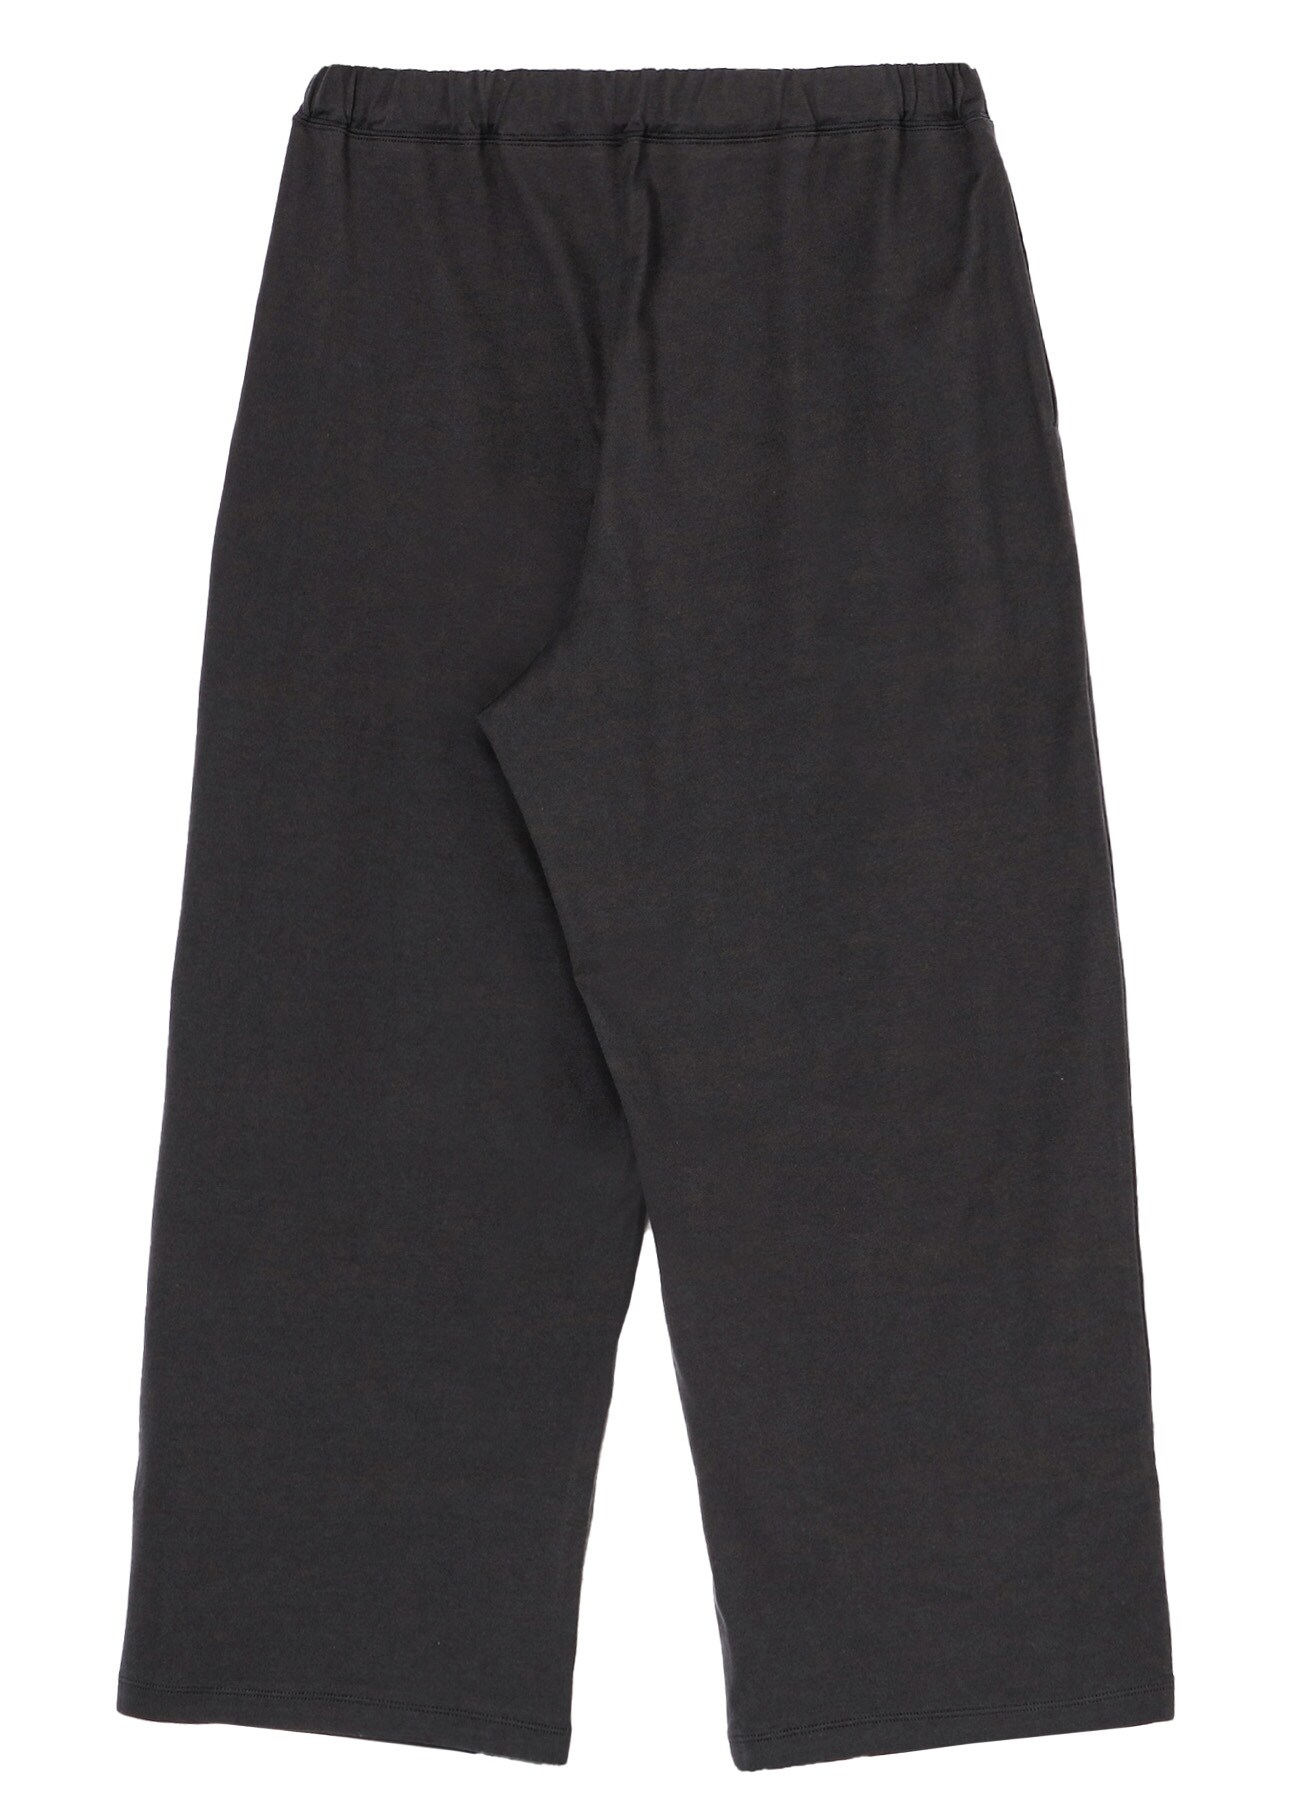 COTTON JERSEY SWITCHING PANTS (L)(L Black): Y's for living｜THE 